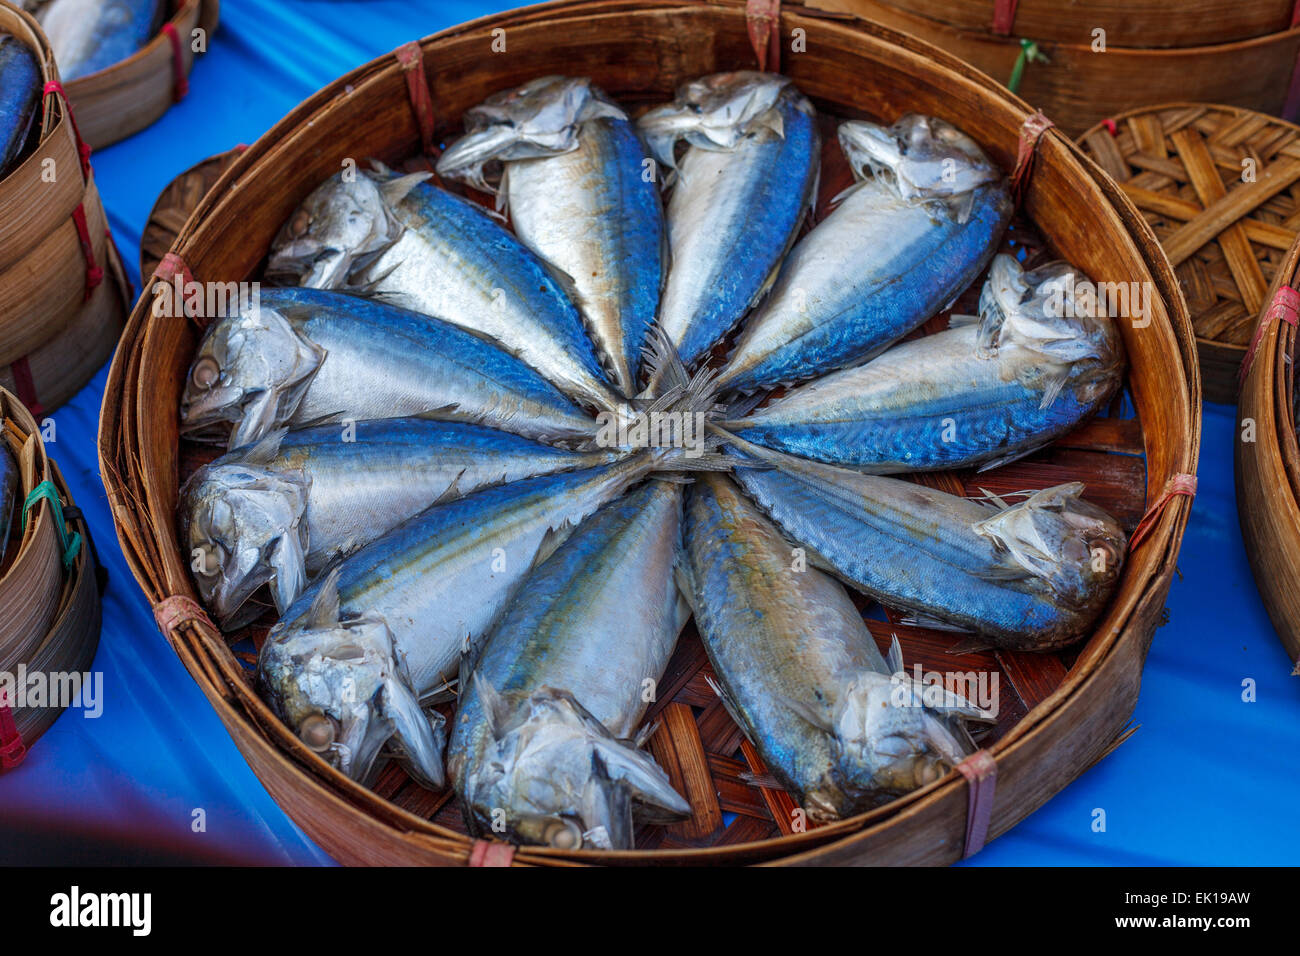 Mackerel fish sold in a wooden box Stock Photo